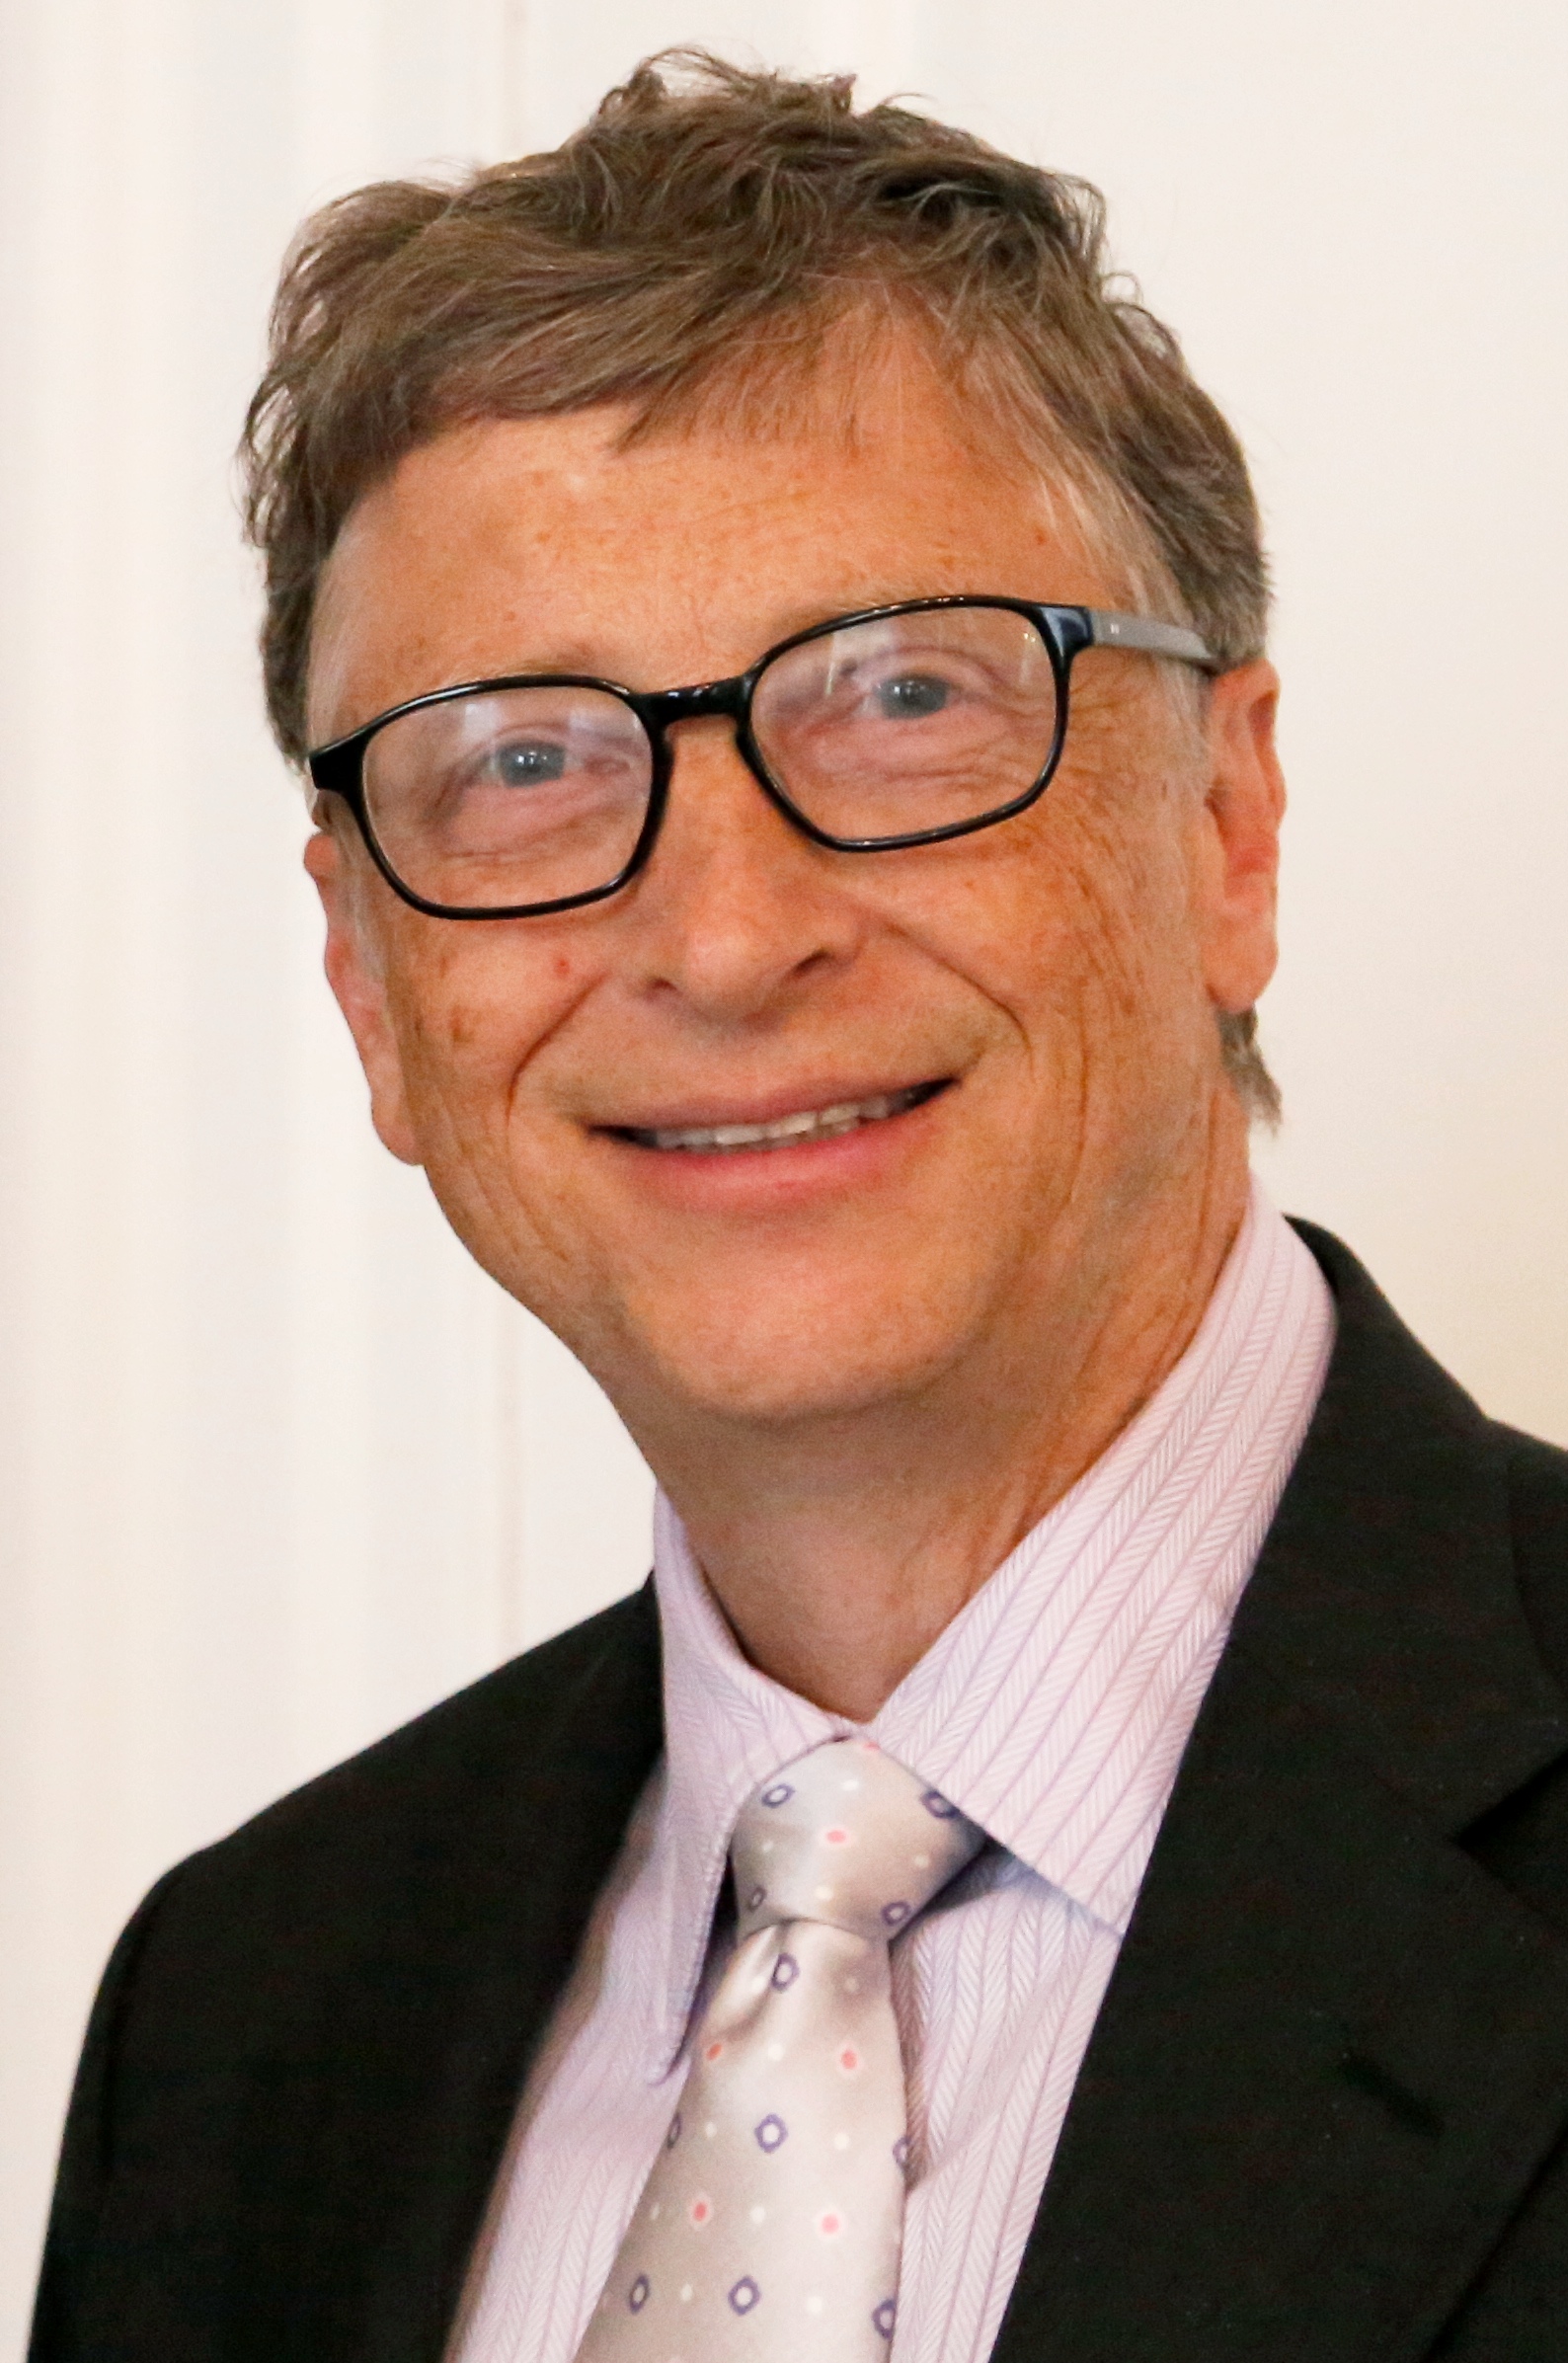 Bill Gates Fears A.I., But A.I. Researchers Know Better